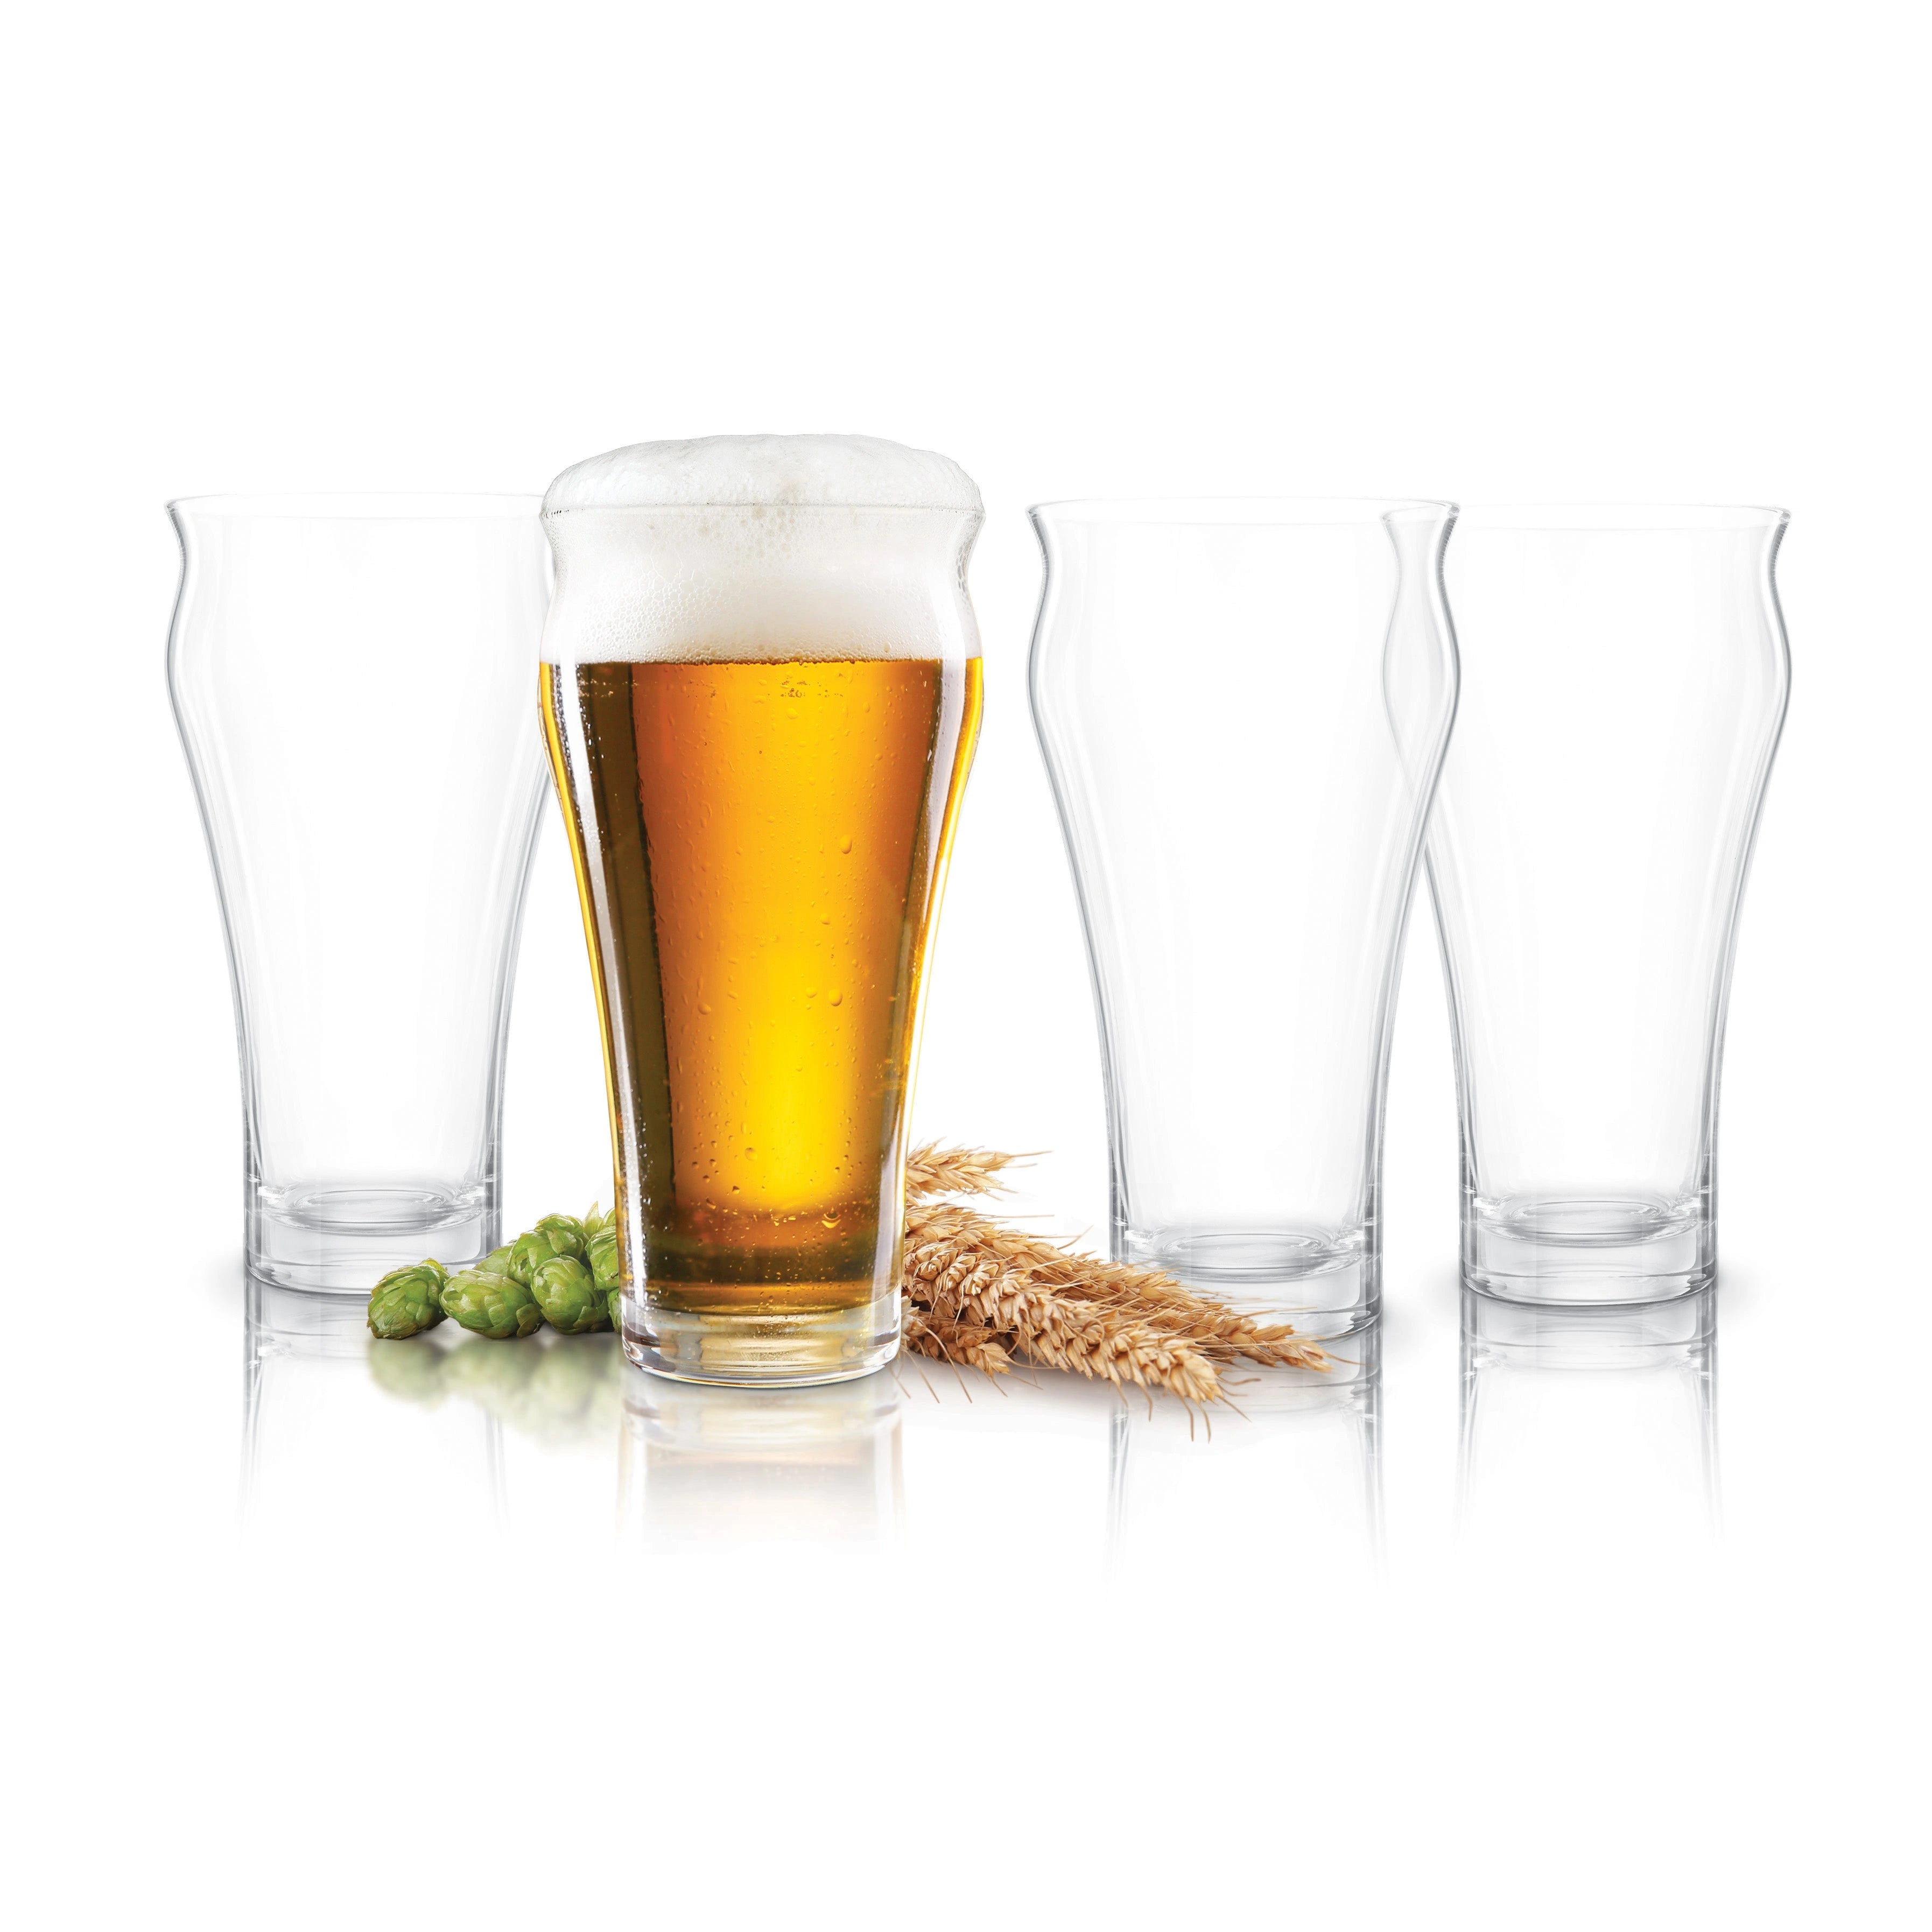 FINAL TOUCH BEWHOUSE BEER GLASS 500ML 4PK